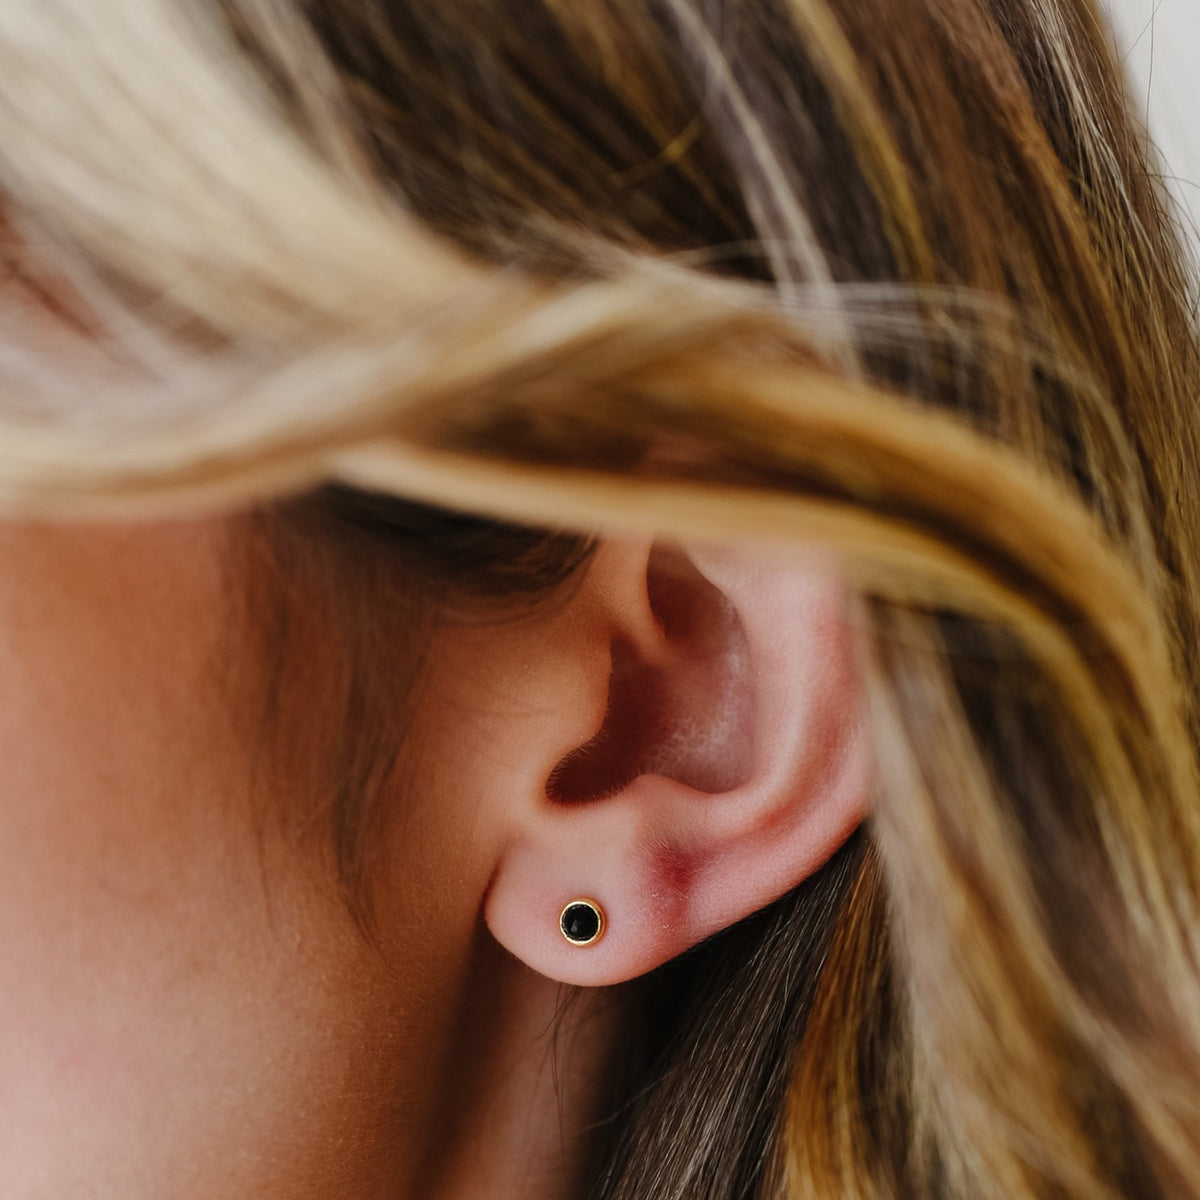 TINY PROTECT STUD EARRINGS - BLACK ONYX &amp; GOLD - SO PRETTY CARA COTTER